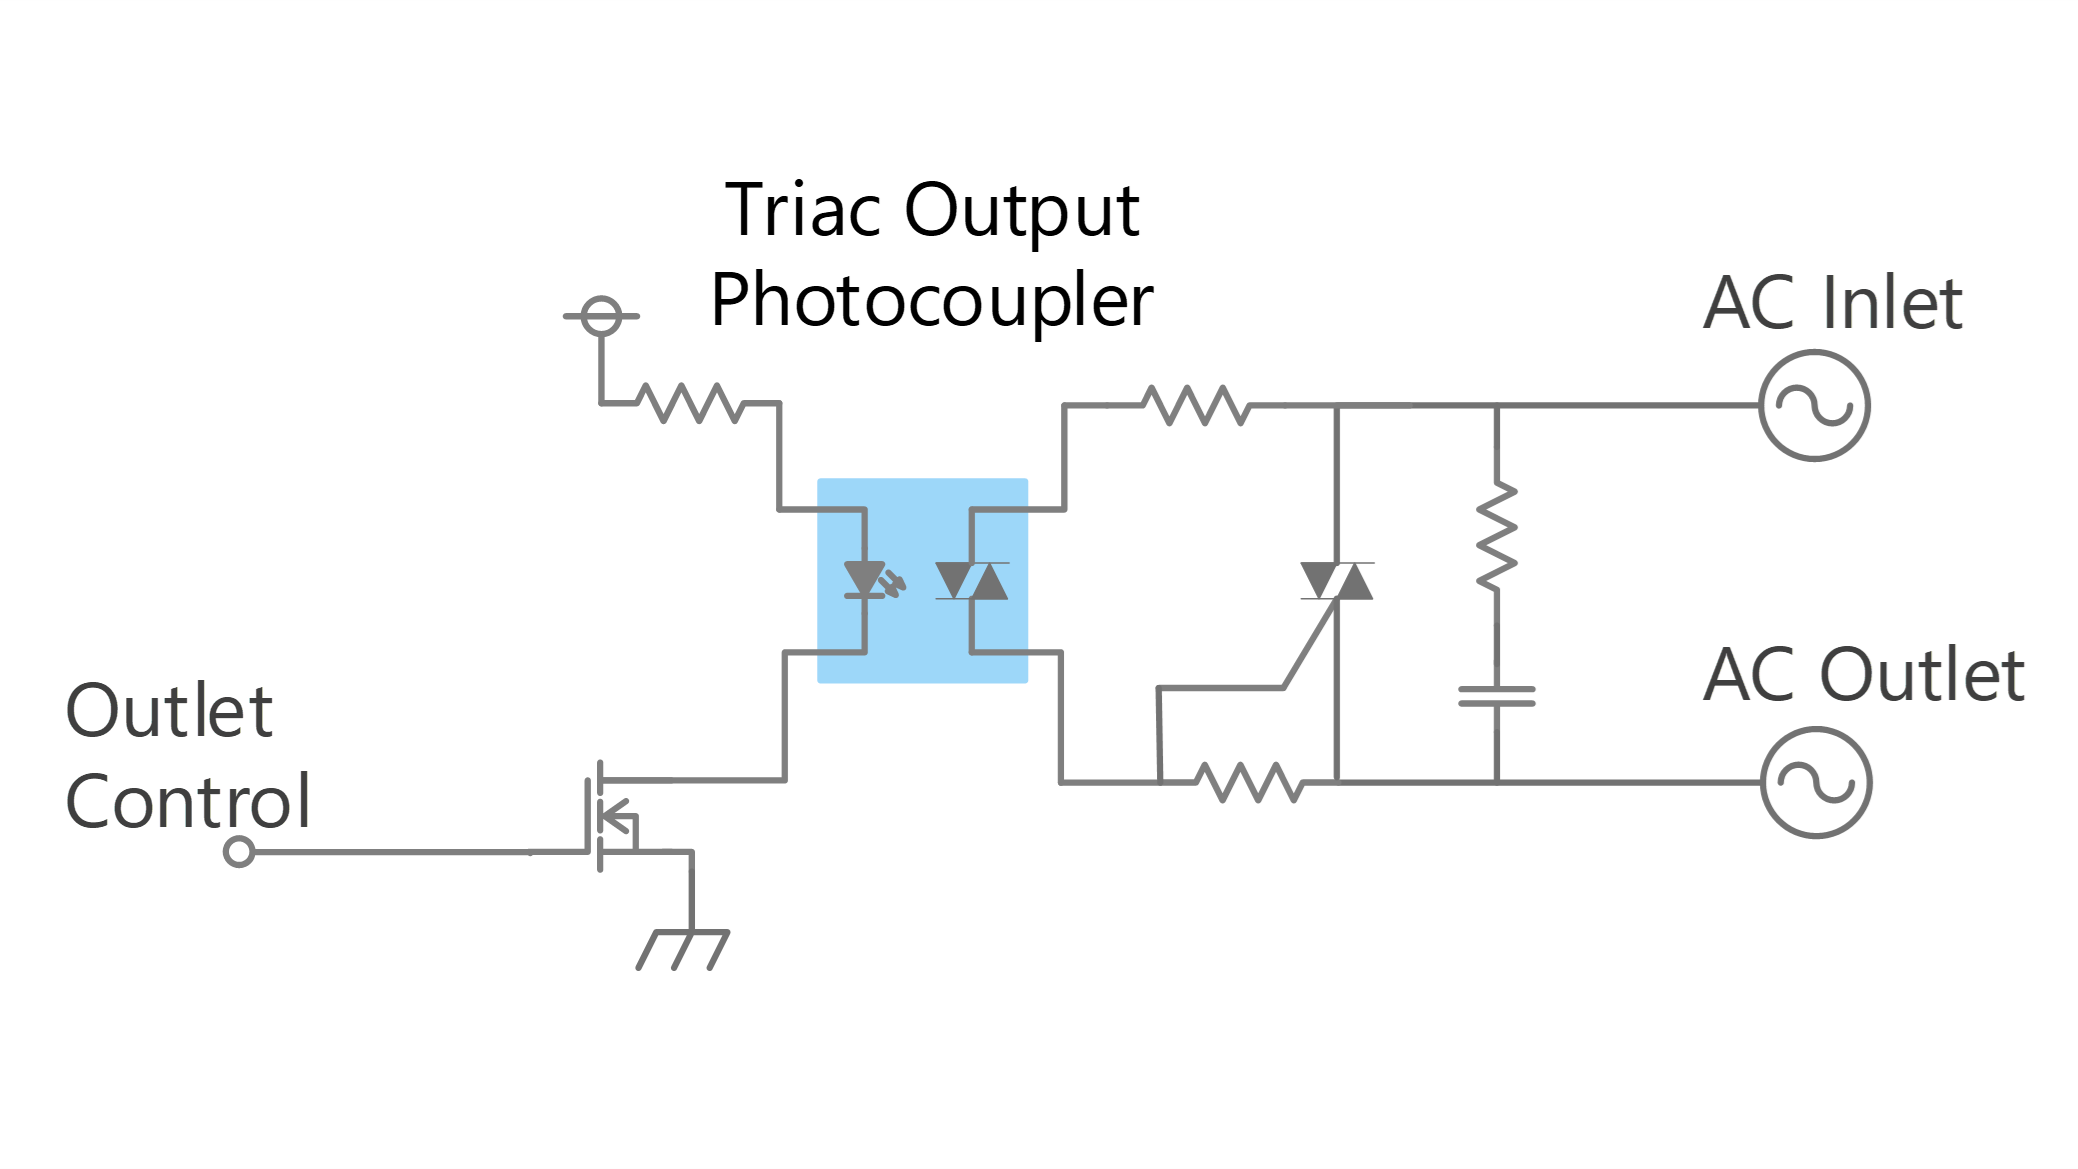 AC switch circuit using triac and triac output photocouplers (1 A or more)